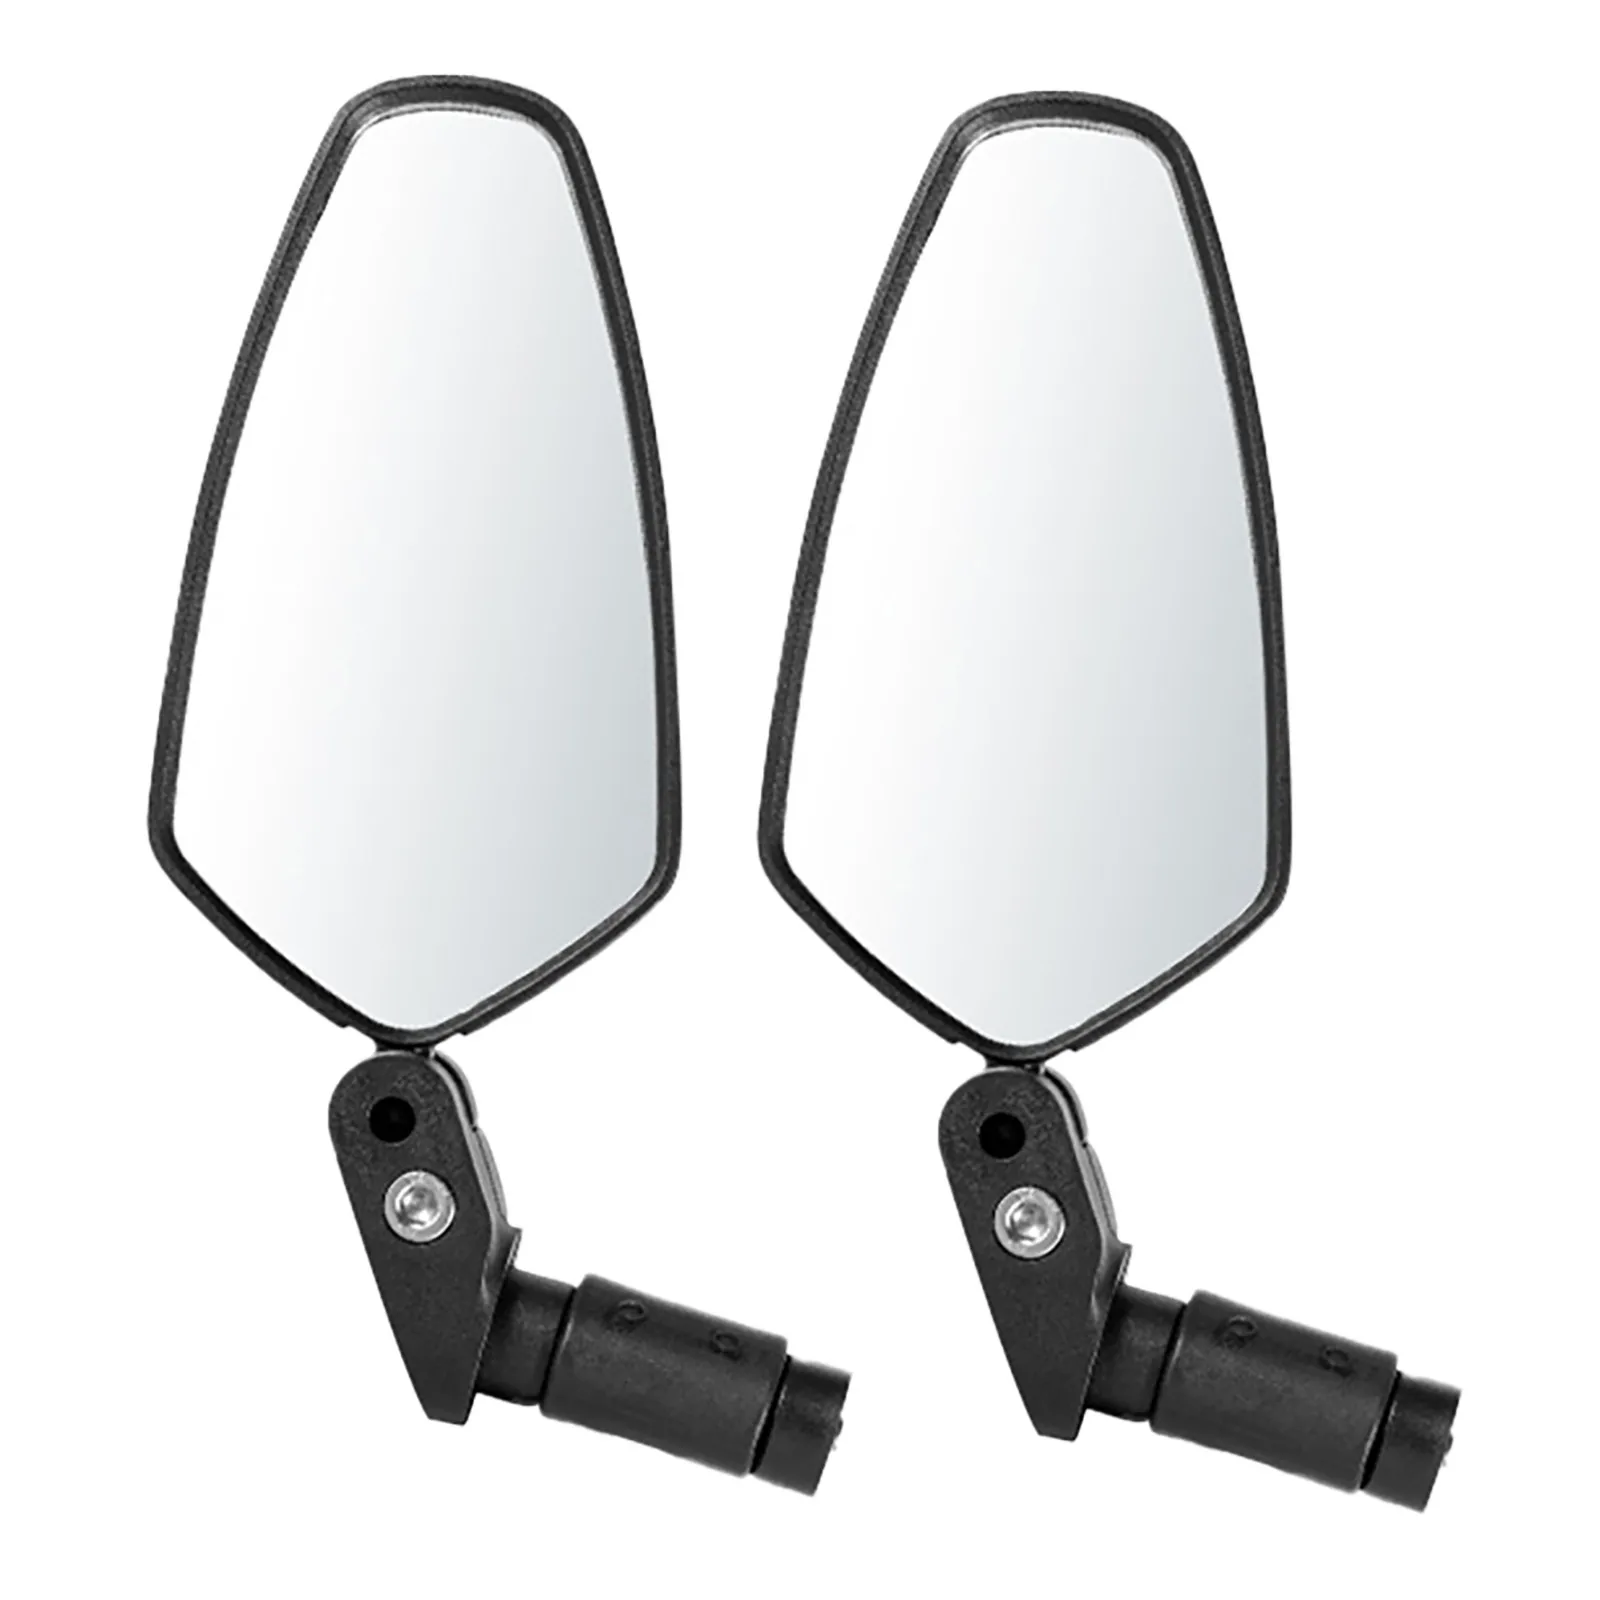 

Mirror For Bicycle Bike Rear View Mirror Mtb Road 360 Degrees Rotatable Rearview Mirrors Handlebar Cycling Mirror Bike Accessory